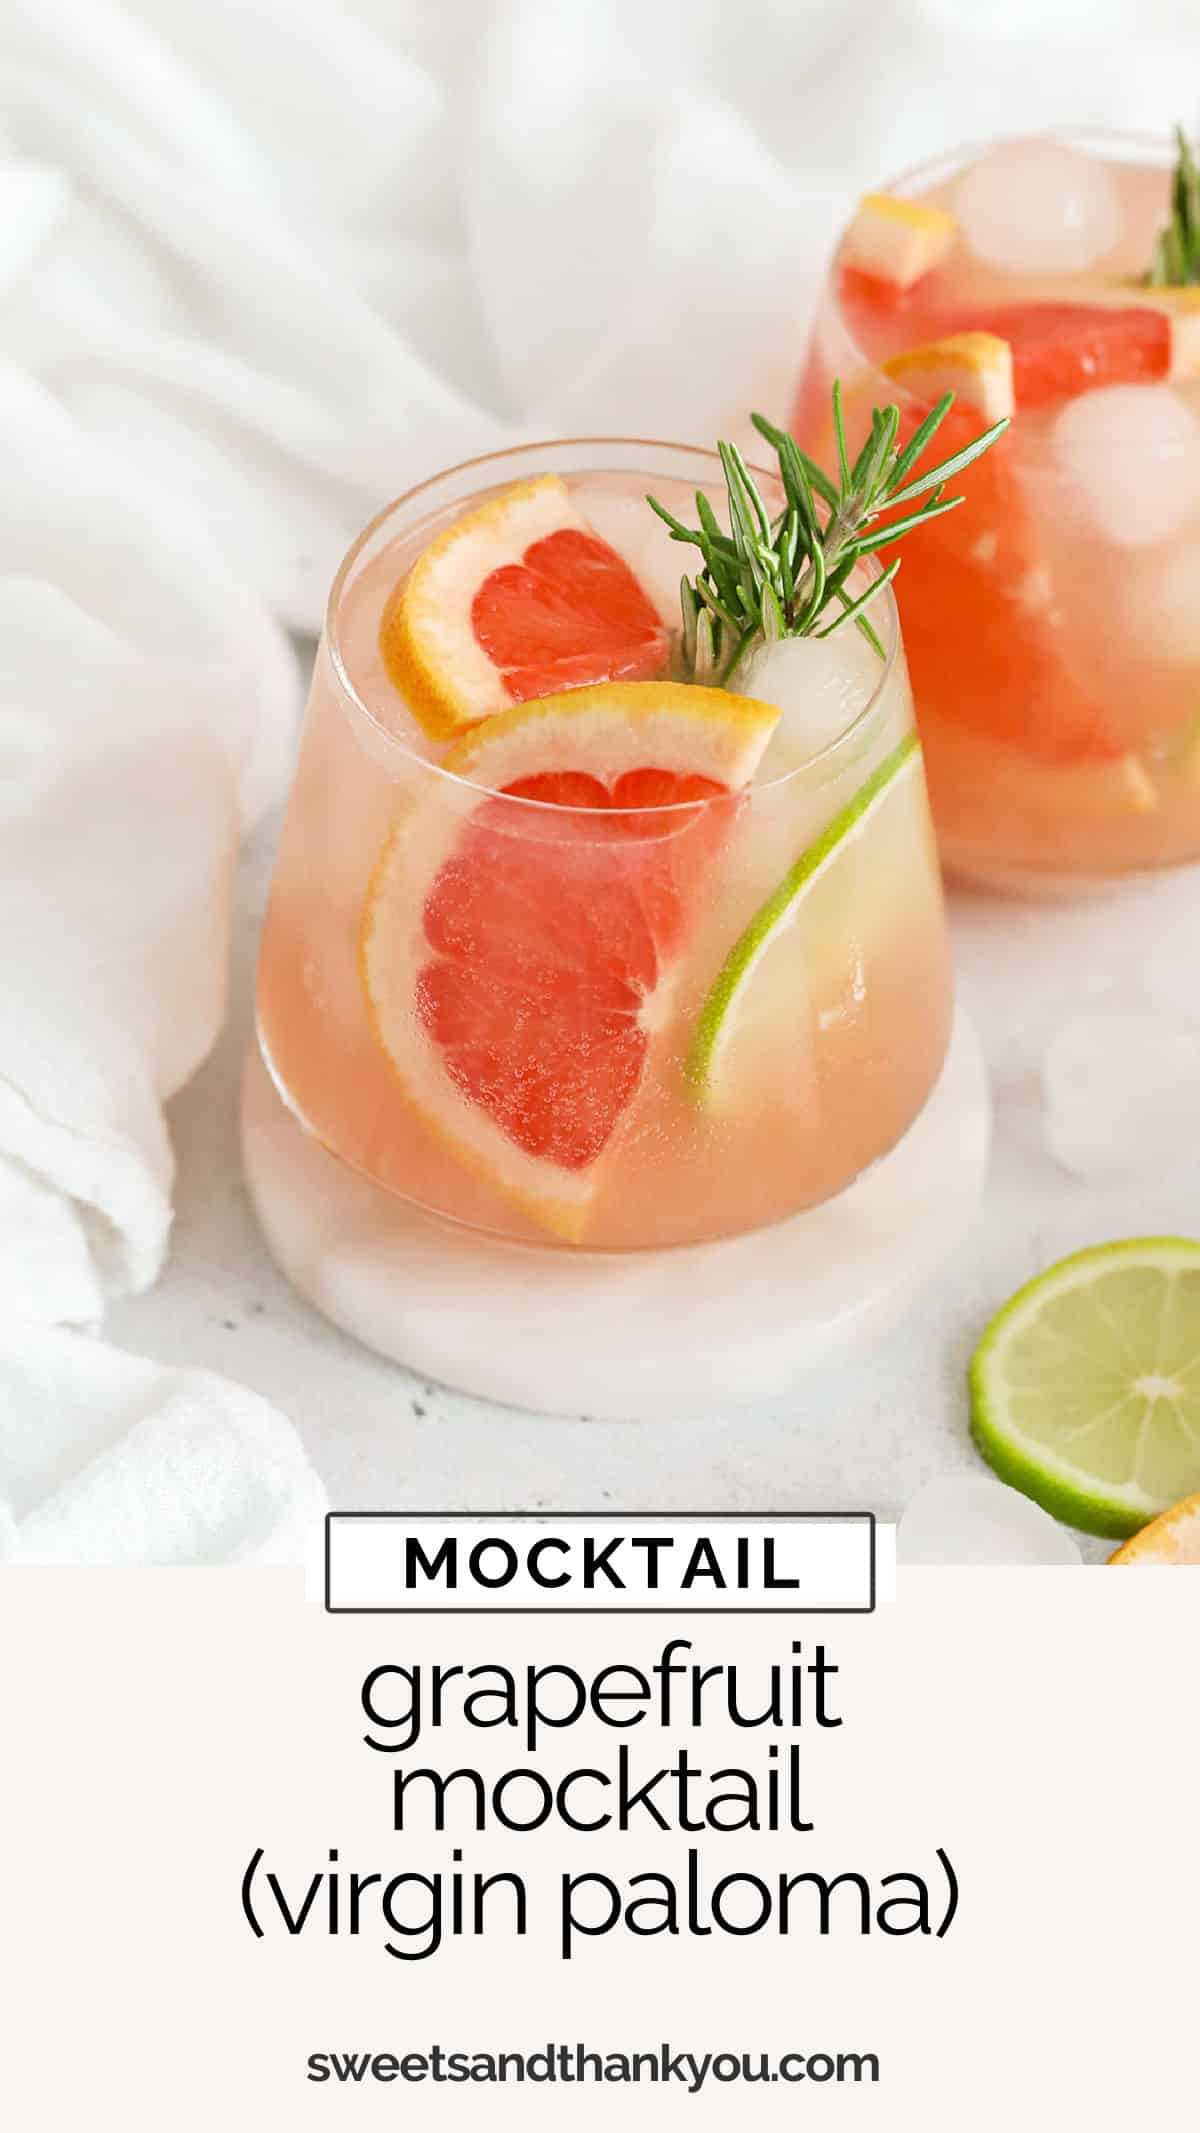 Grapefruit Mocktail (Virgin Paloma) - This non-alcoholic twist on a paloma is the perfect blend of citrus and sparkle. You'll love the fresh, bright flavor! // virgin paloma recipe / grapefruit mocktail recipe / non-alcoholic paloma / non-alcoholic grapefruit drink recipe / easy mocktail recipe / citrus mocktail / holiday mocktail / christmas mocktail / winter mocktail / new years eve mocktail / party mocktail / non-alcoholic party drink / pink mocktail / pink grapefruit mocktail